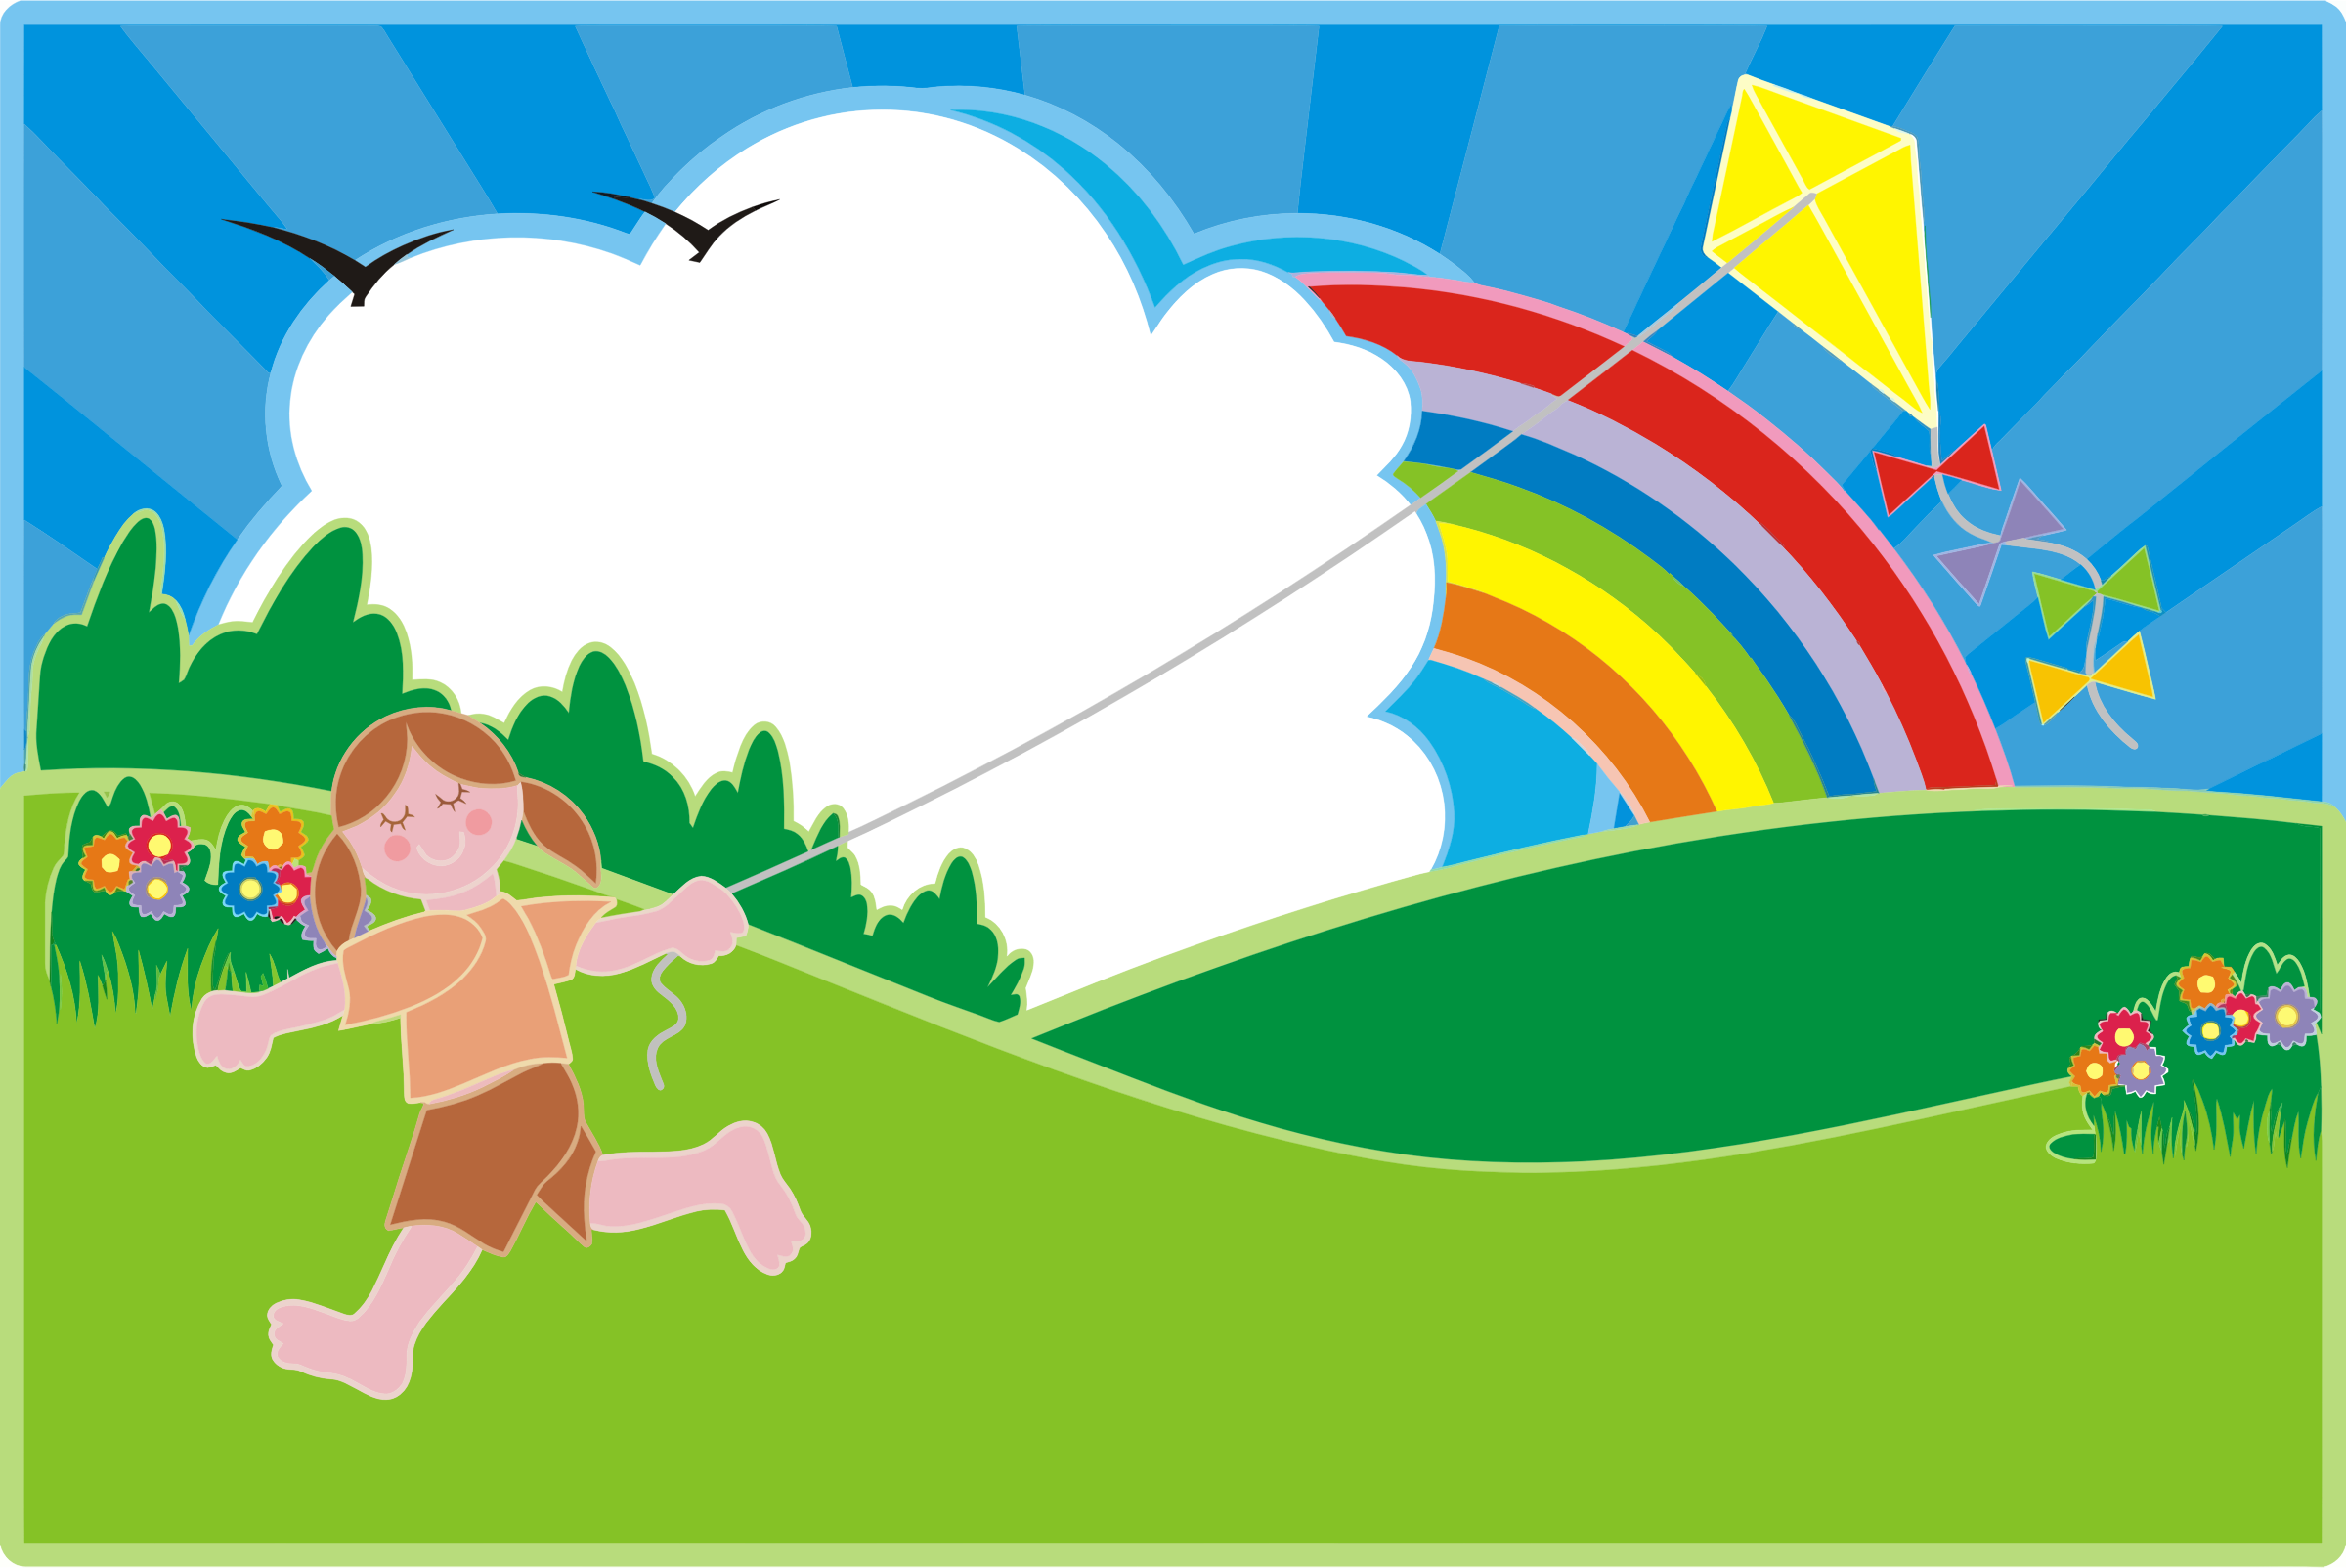 This Free Icons Png Design Of Girl Flying Kite In Colorful Landscape Hdpng.com  - Kite Images, Transparent background PNG HD thumbnail